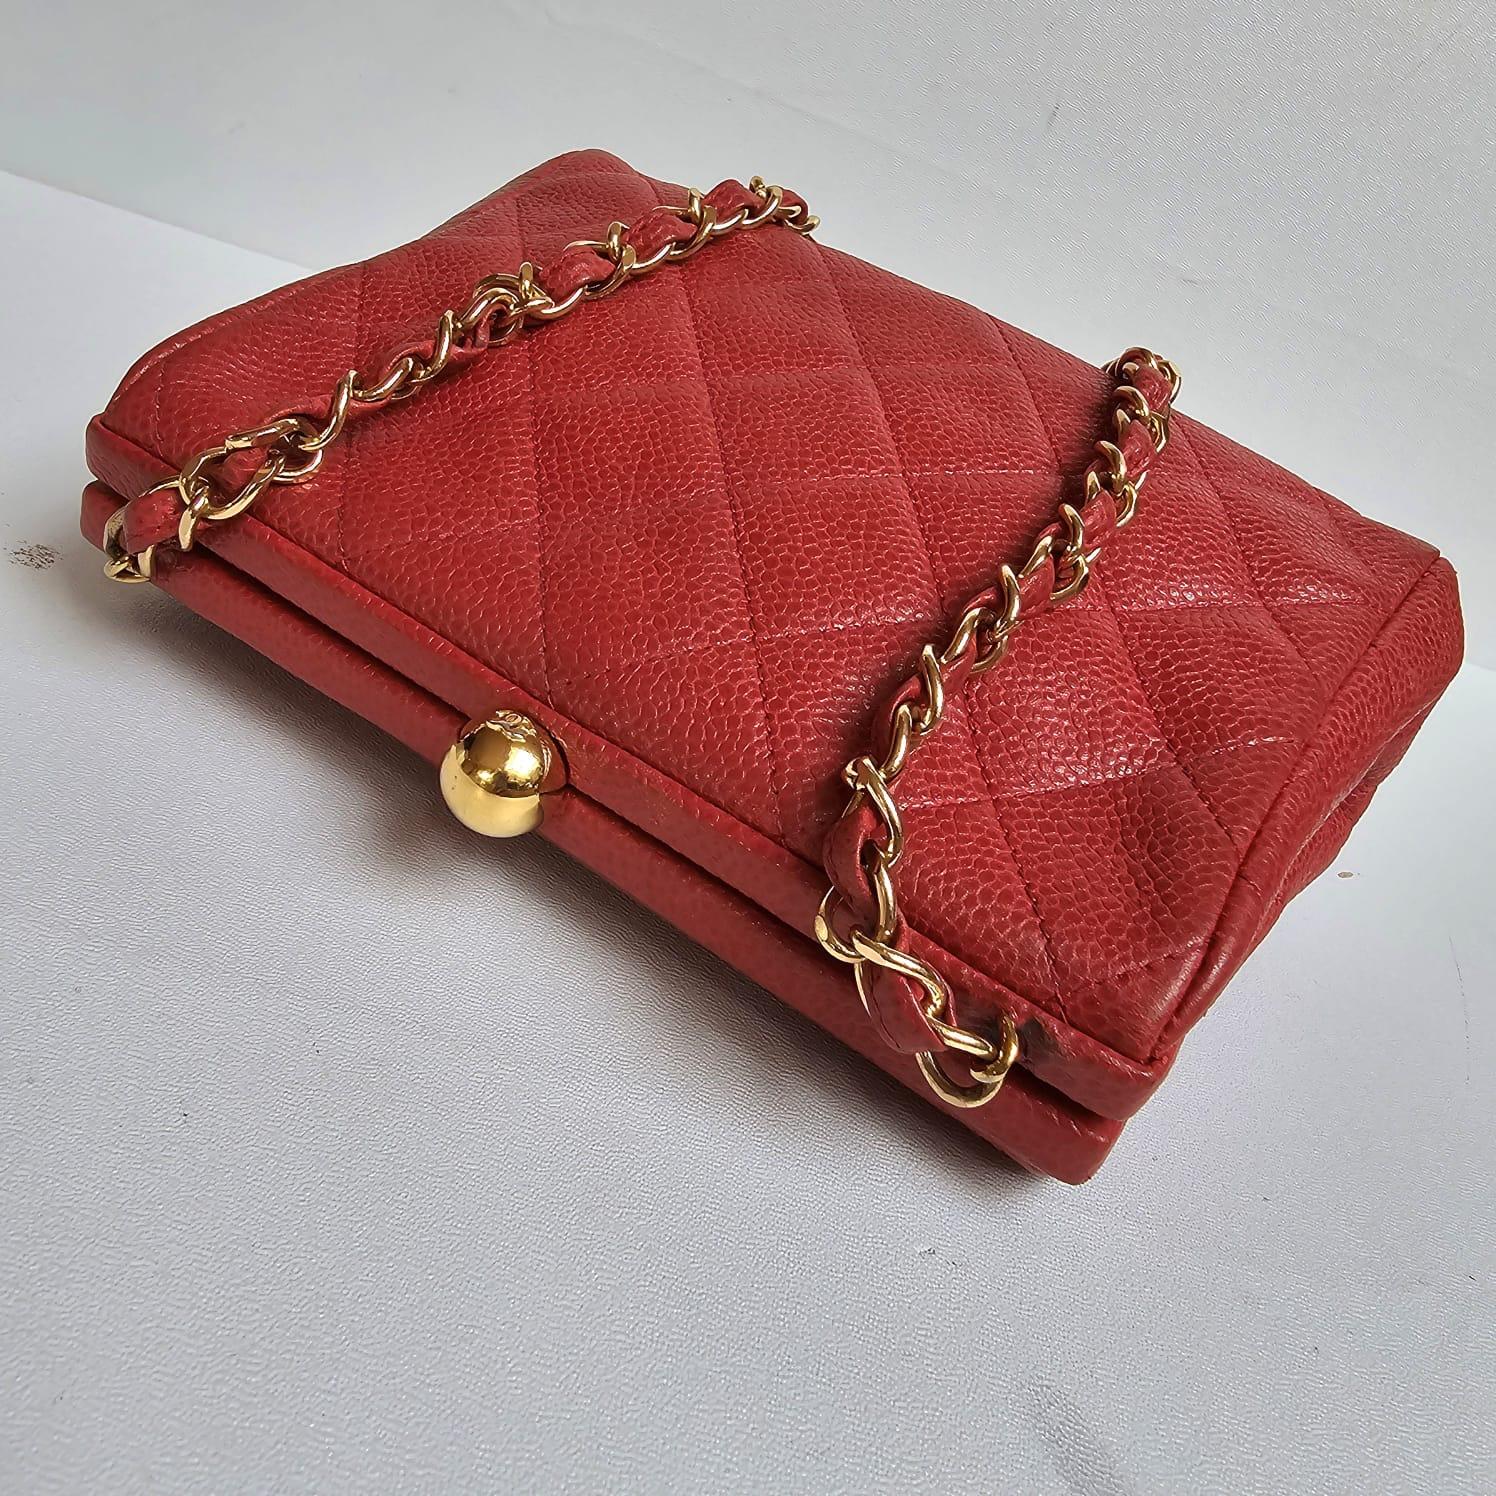 Vintage 1990s Chanel Red Caviar Quilted Mini Purse Sling Bag For Sale 11